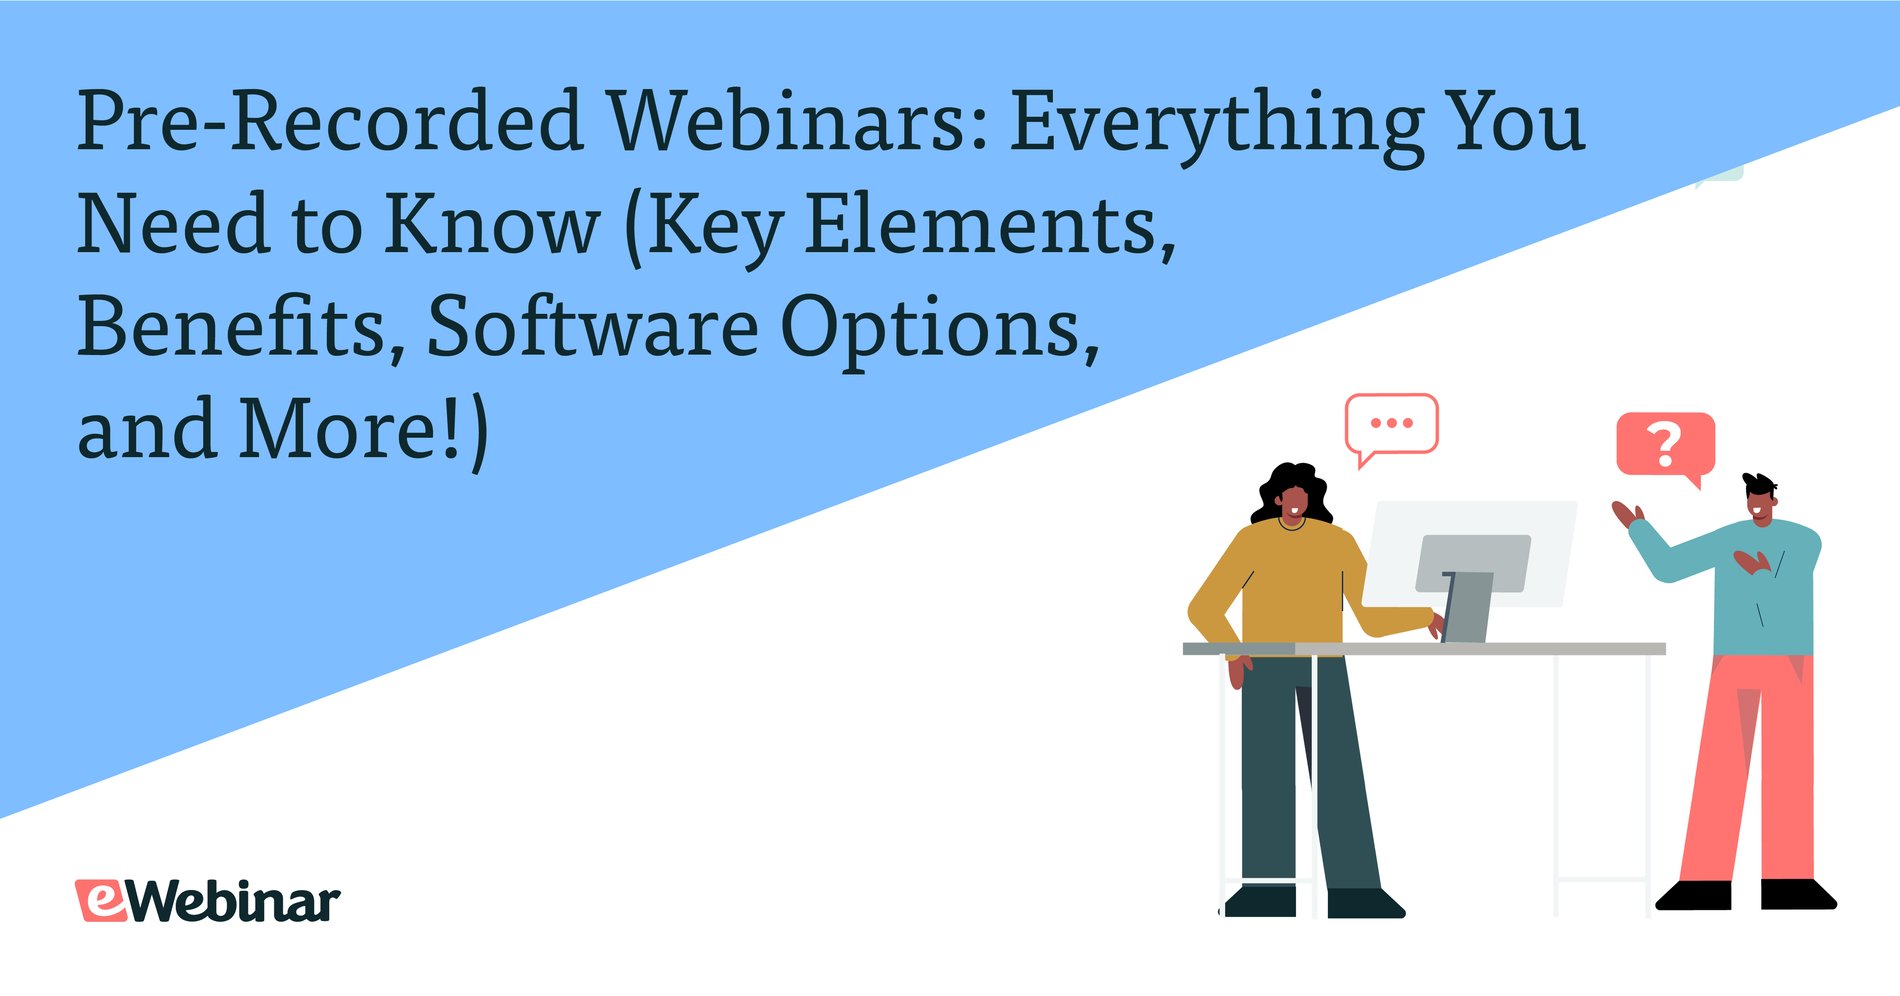 Pre-Recorded Webinars: Everything You Need to Know (Key Elements, Benefits, Software Options, and More!)